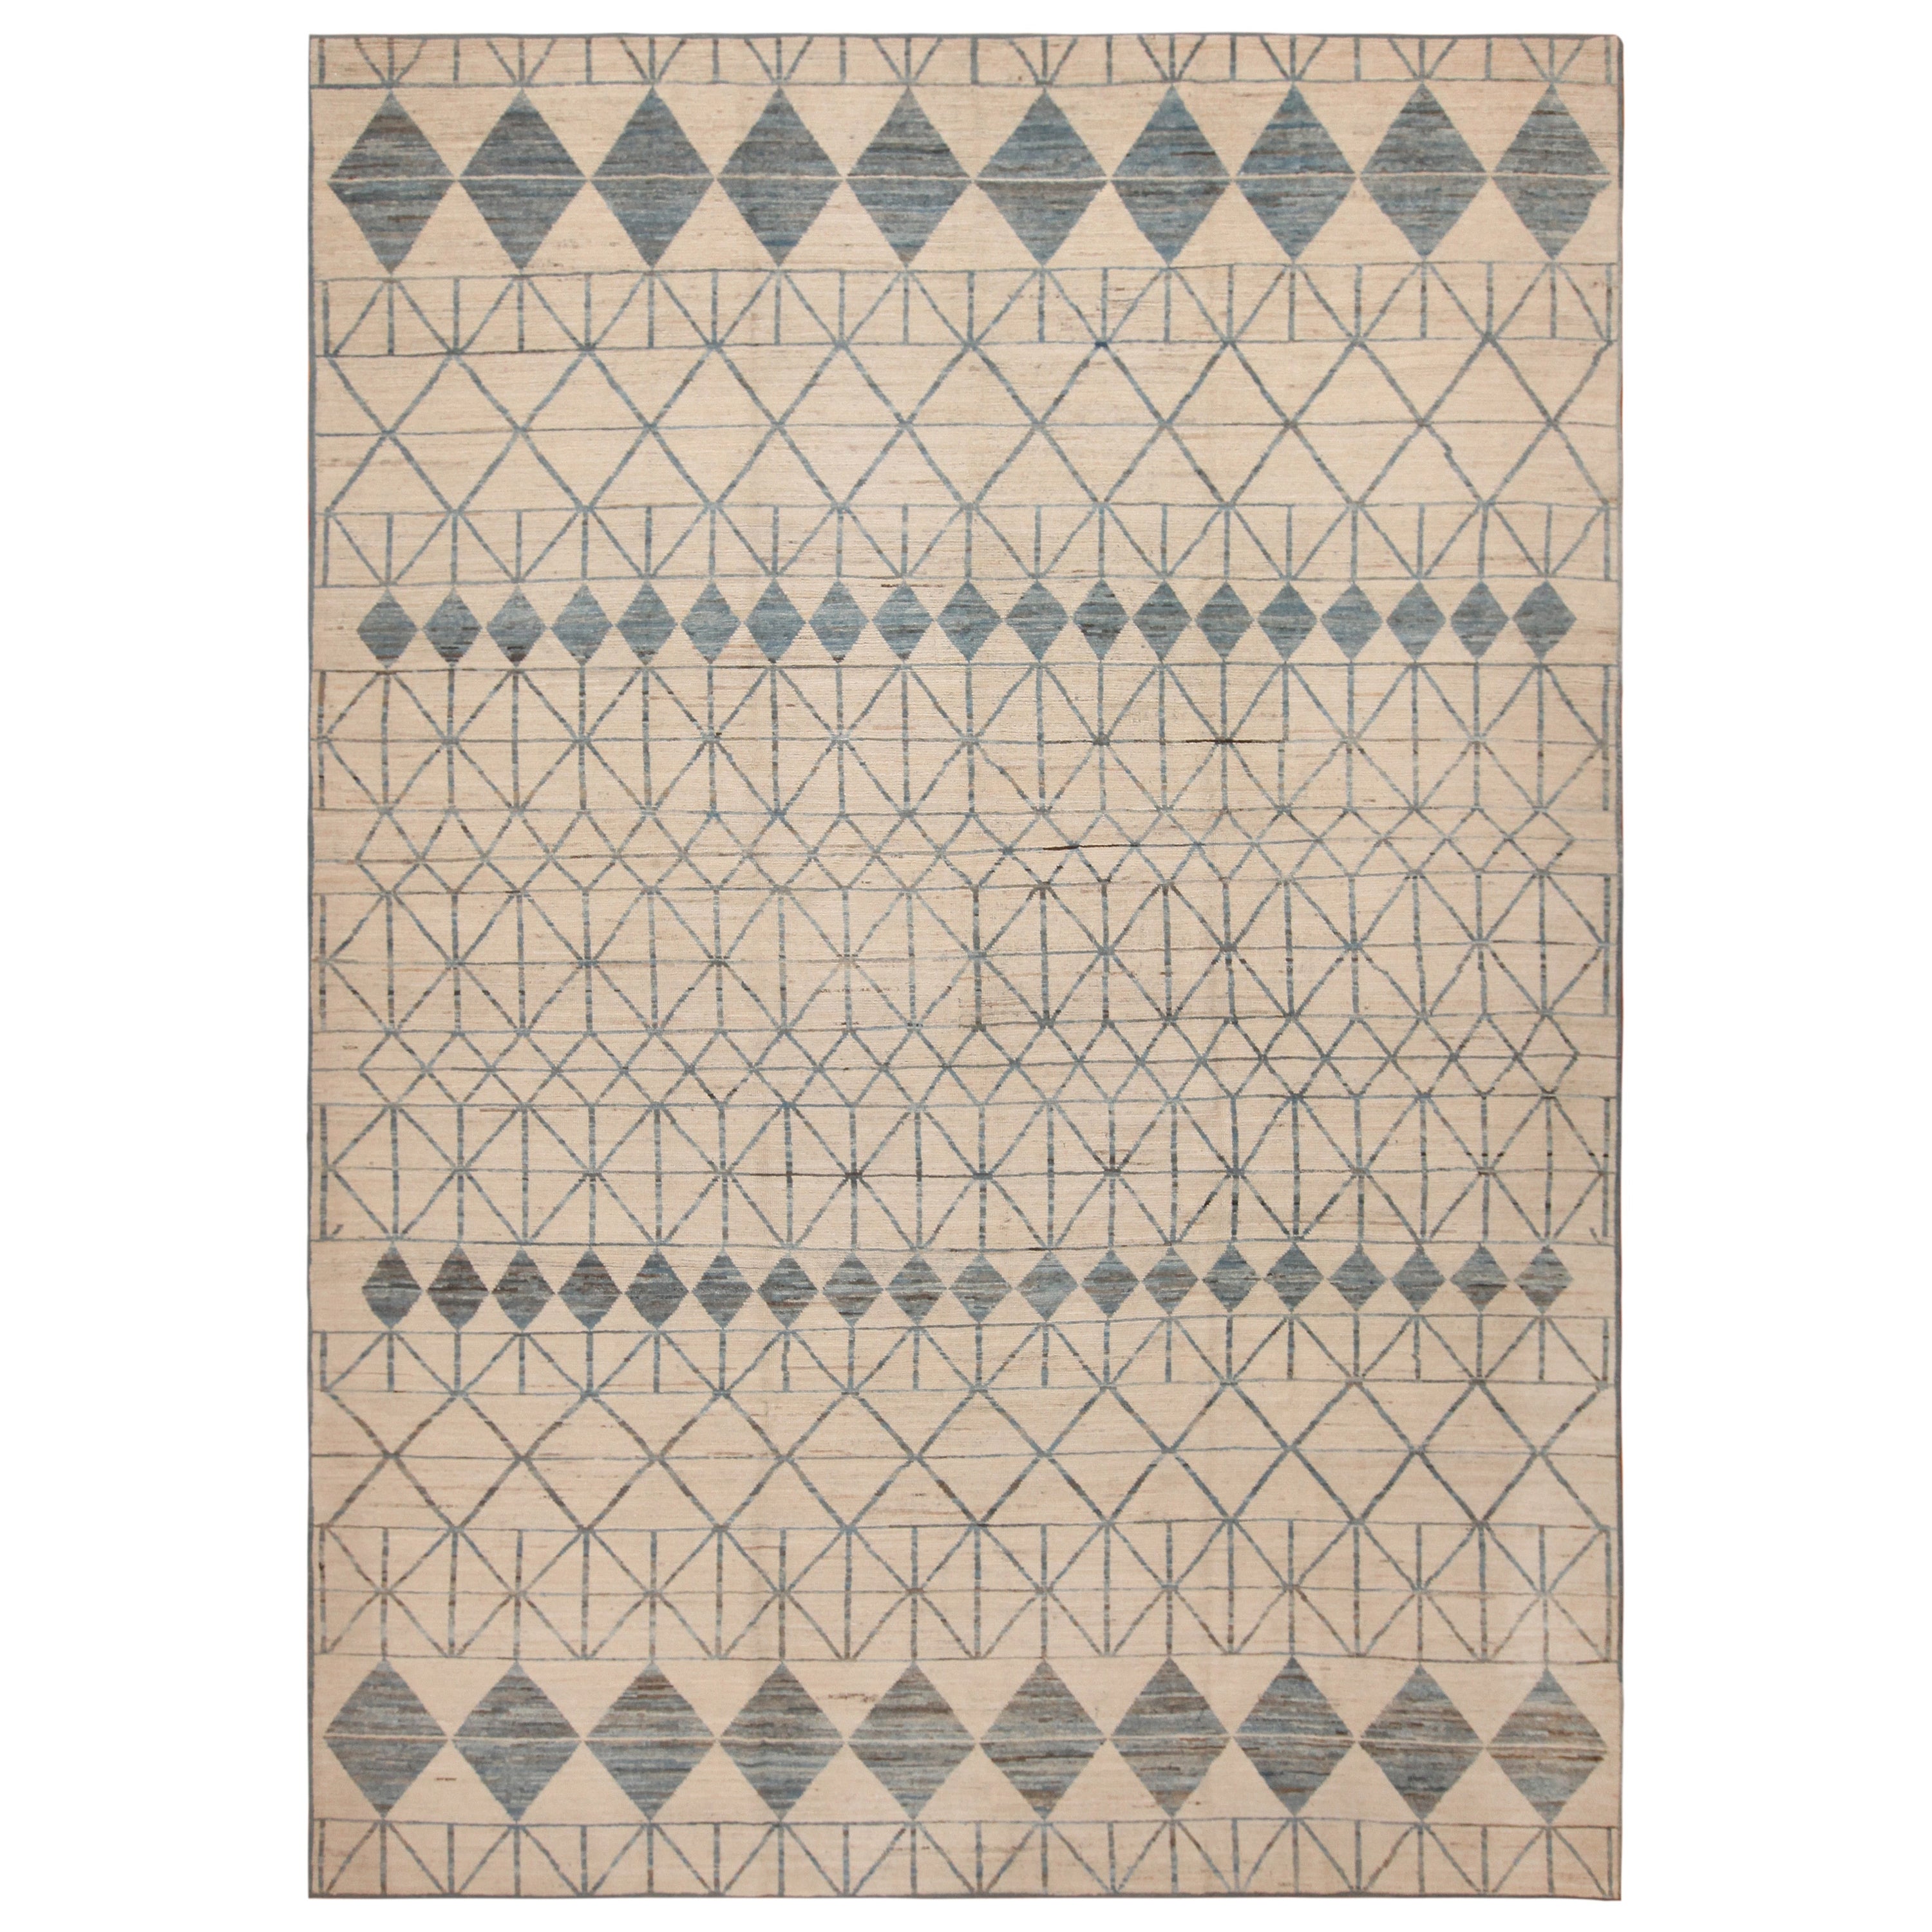 Nazmiyal Collection Geometric Design Central Asian Rug. 10 ft 2 in x 14 ft 3 in For Sale